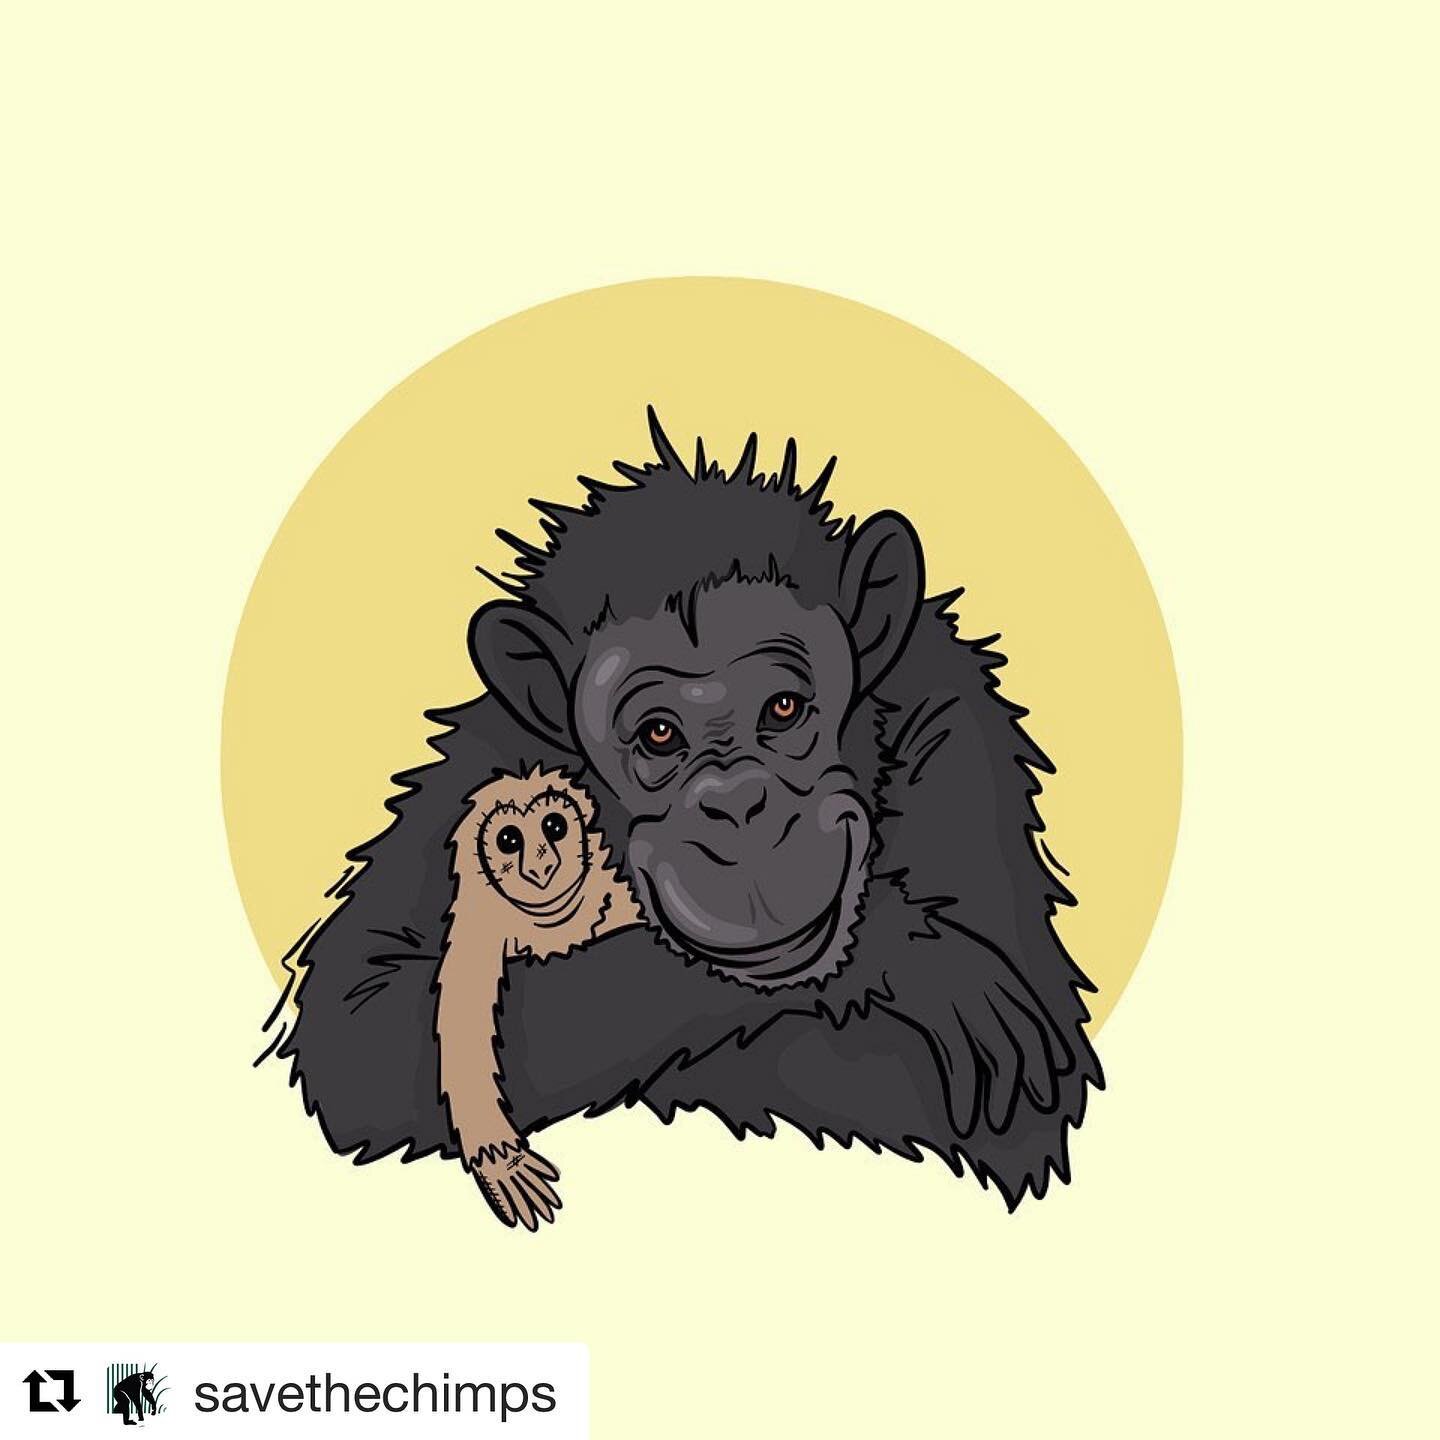 Repost @savethechimps 
・・・
Meet Debbie. This patient and caring chimp was born in Africa sometime in the late 1960's/early 70's. She was captured at the age of 5 and shipped to the U.S. to be used in biomedical research. In 1997, Save the Chimps resc